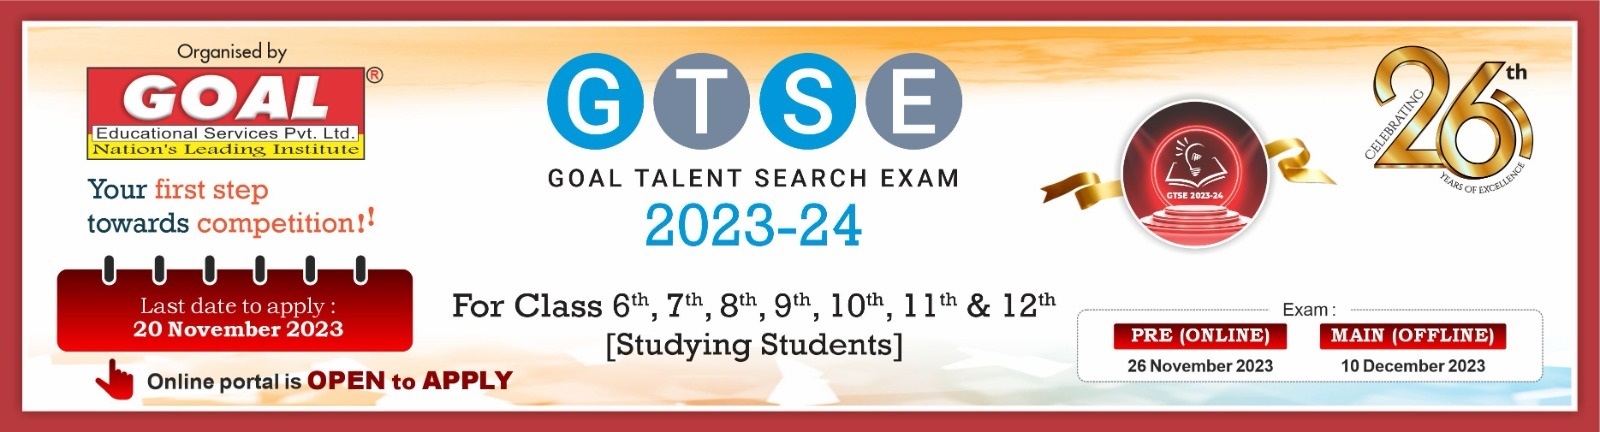 GOAL Talent Search Exam 2023